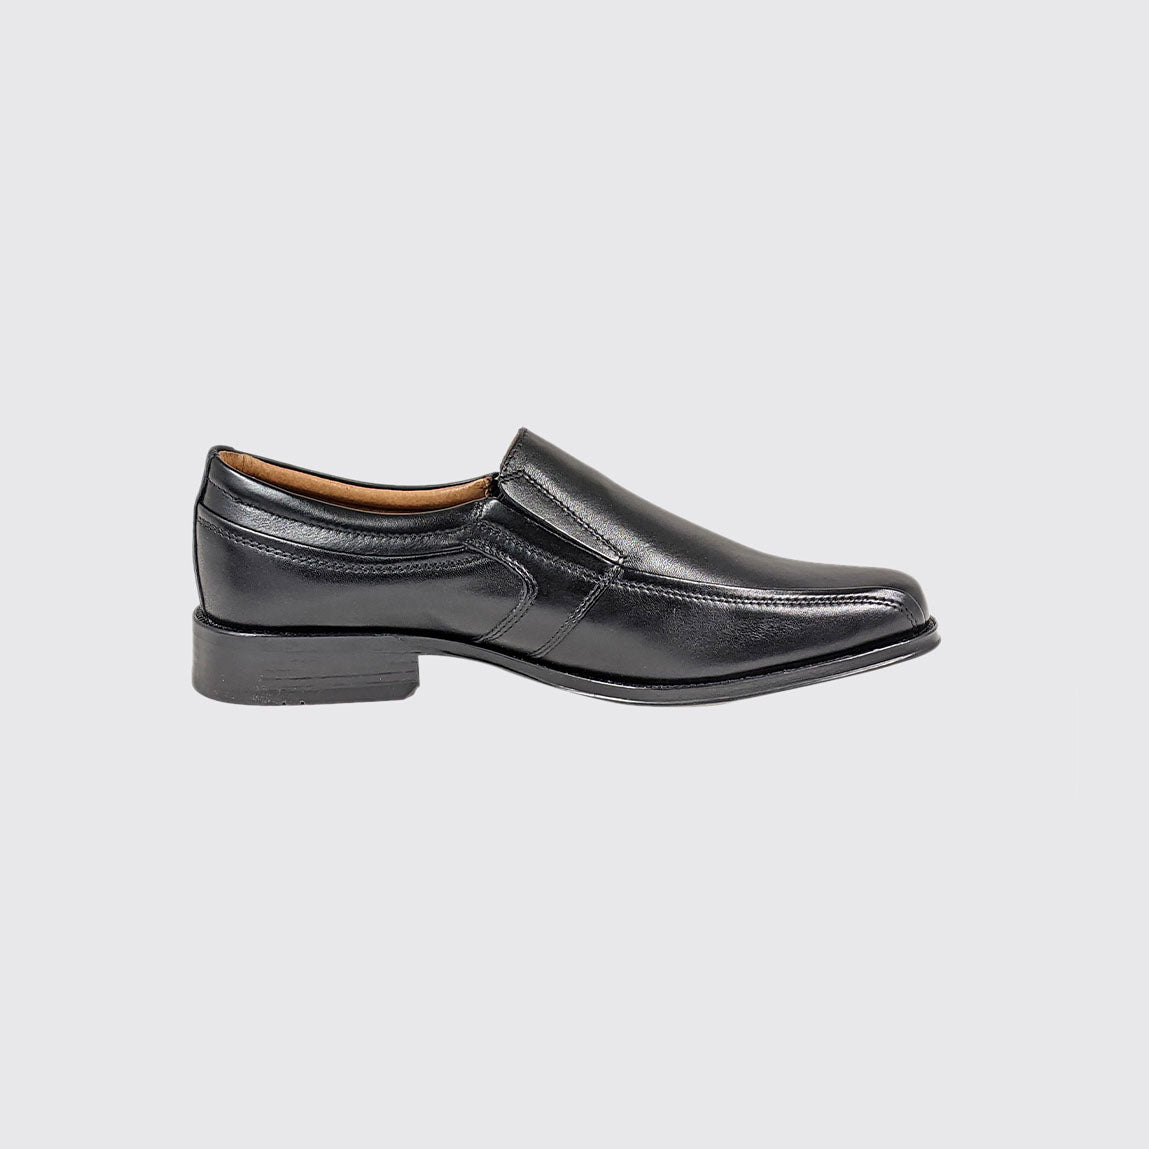 Side view of the formal slip-on shoe by Dubarry.